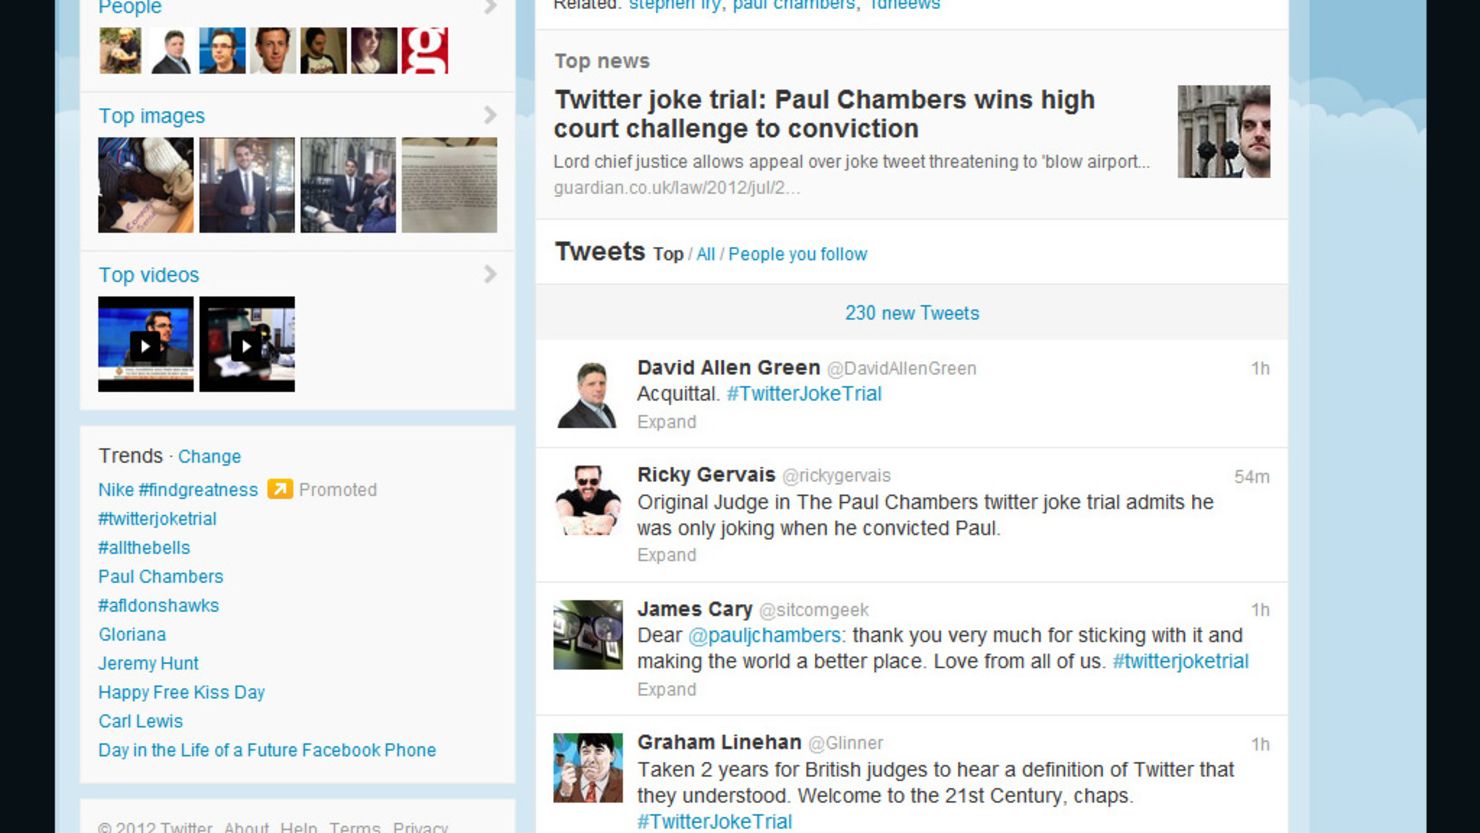 Messages of support flooded into Twitter following the court verdict to clear Paul Chambers of sending a menacing tweet.